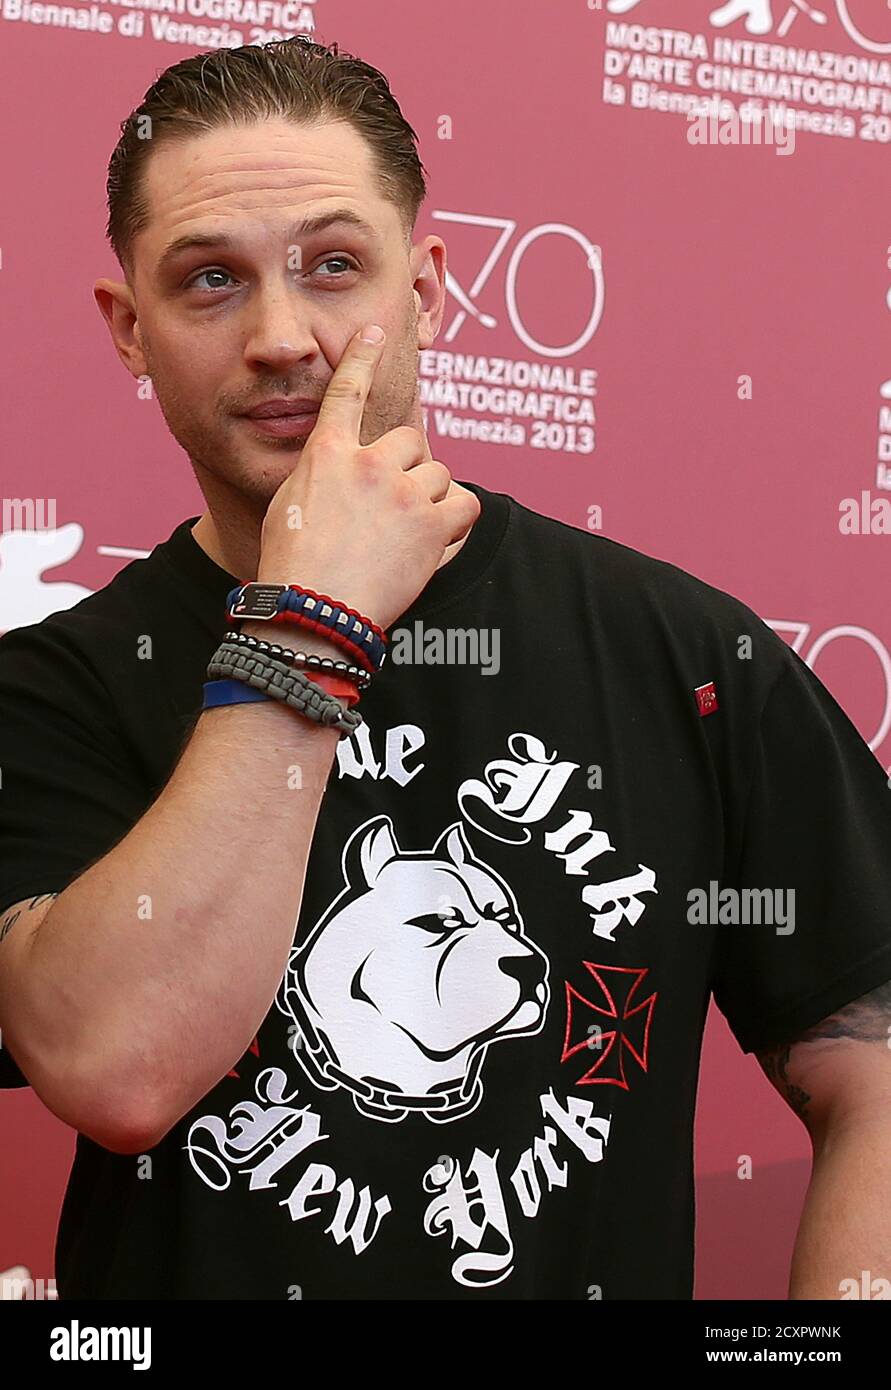 Cast member Tom Hardy scratches his face during a photocall for the movie 'Locke', directed by Steven Knight, during the 70th Venice Film Festival in Venice September 2, 2013. REUTERS/Alessandro Bianchi (ITALY - Tags: ENTERTAINMENT) Stock Photo